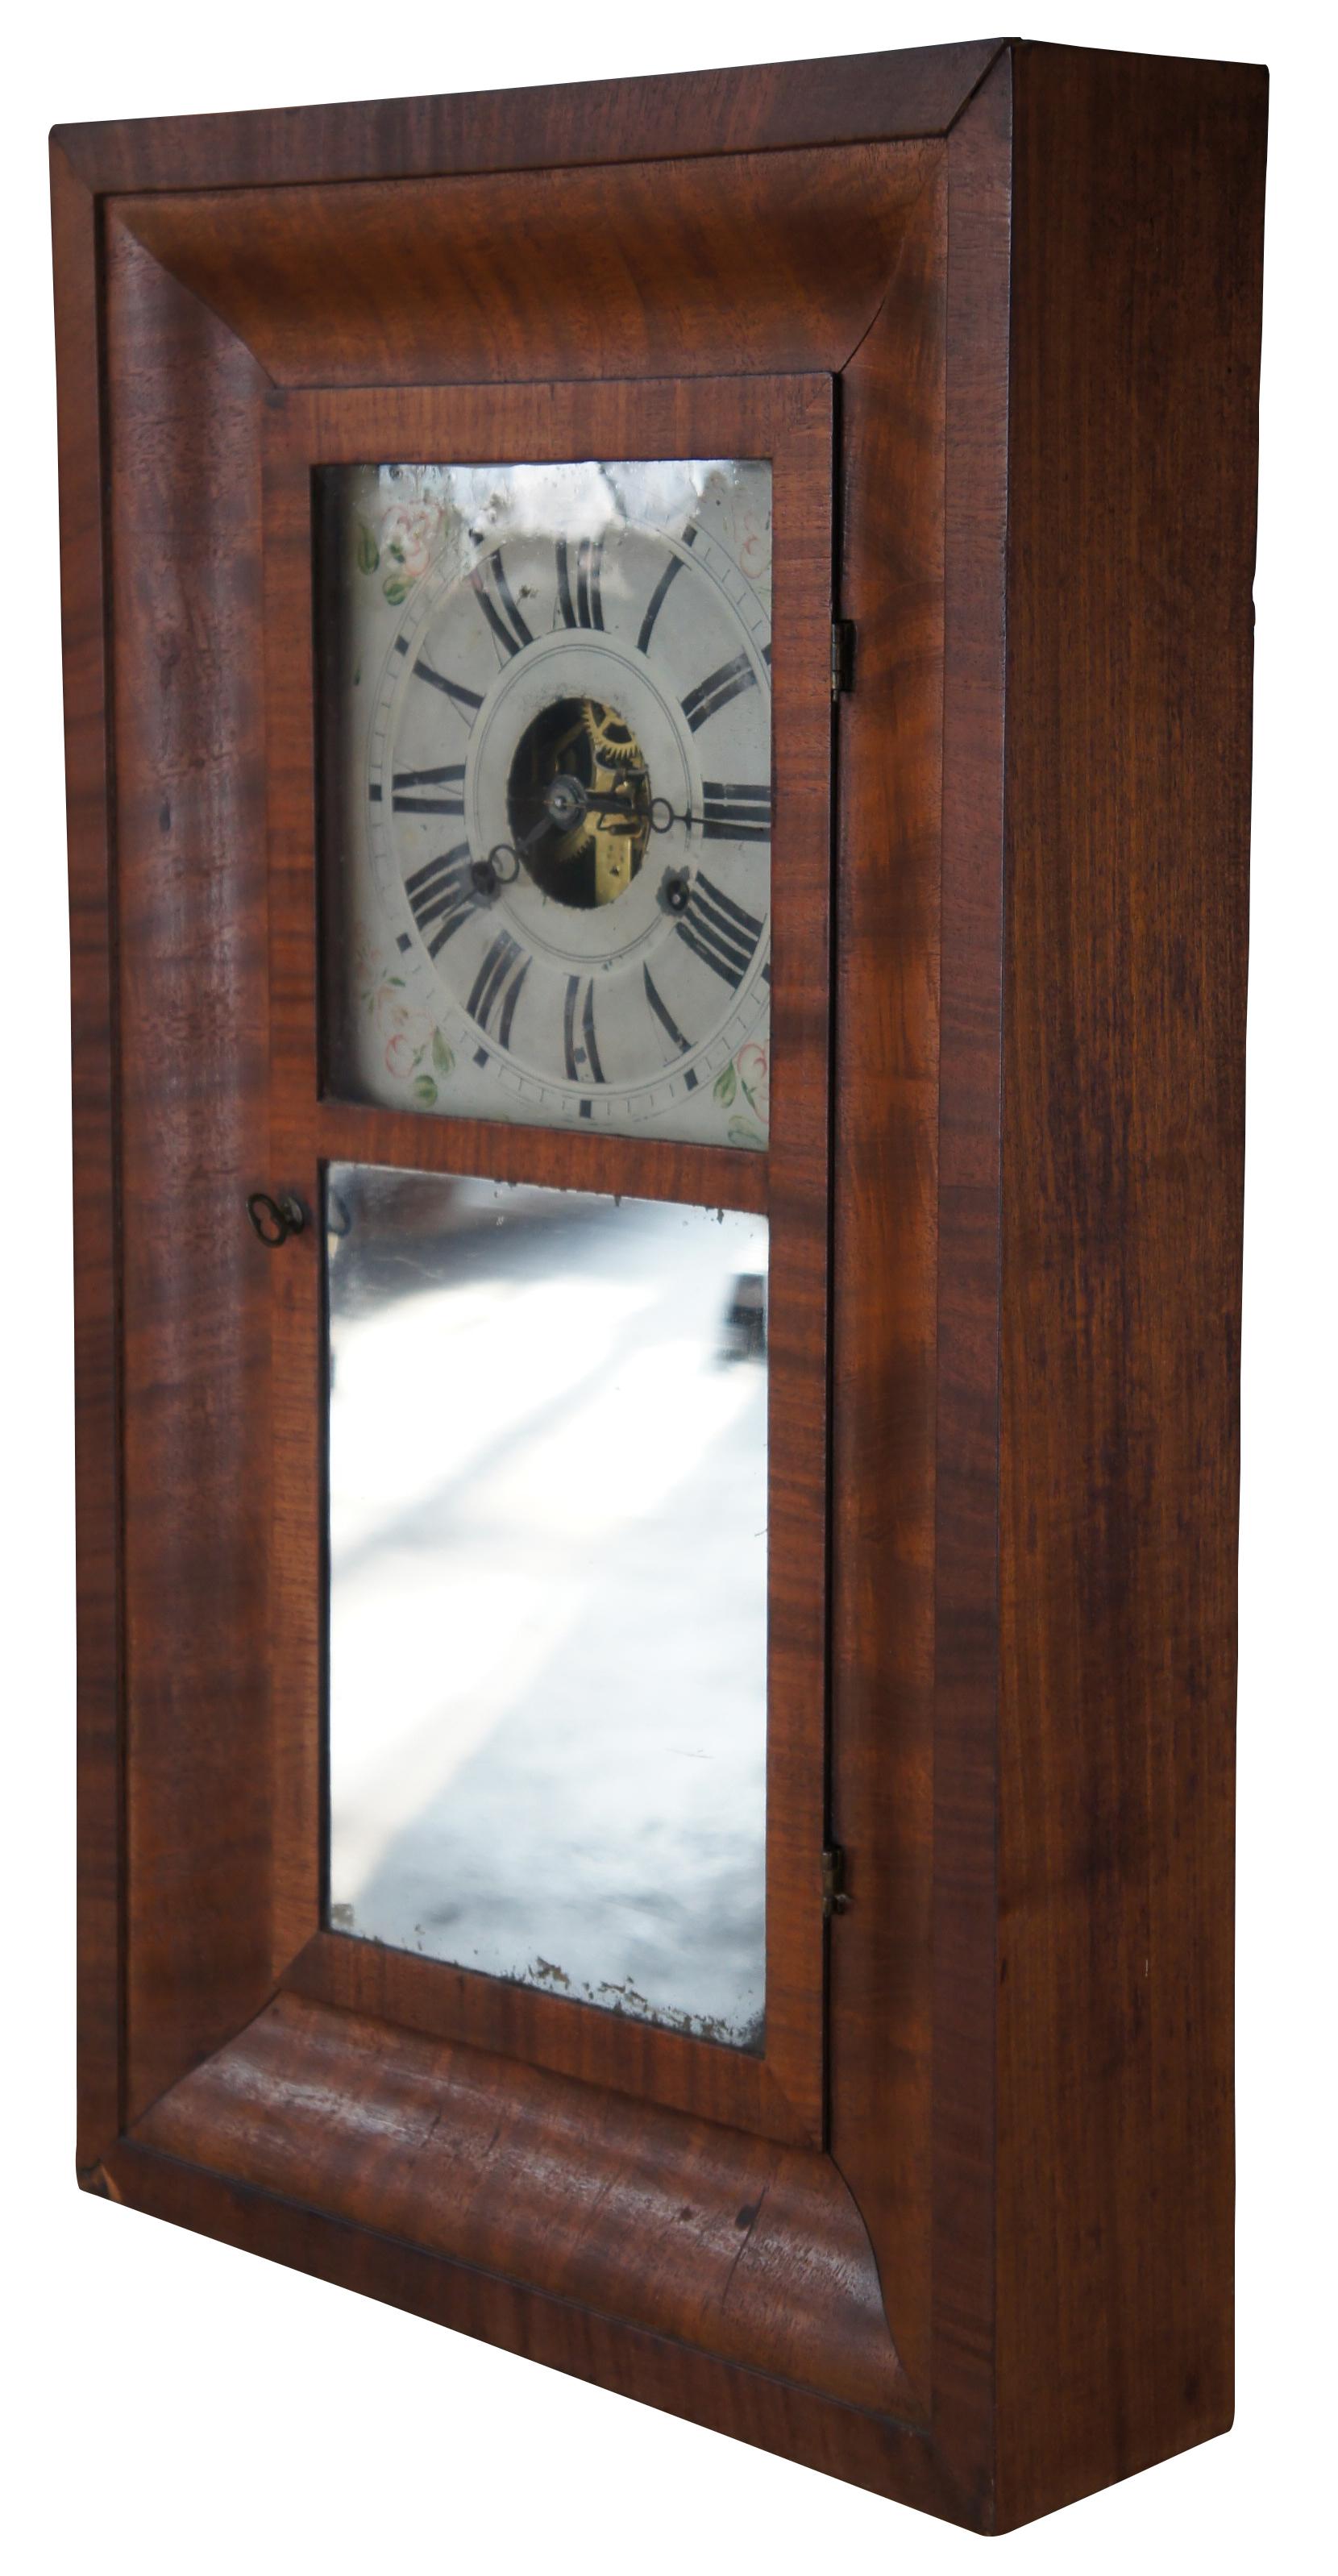 Antique mid-19th century Manross Prichard & Co 8 day shelf clock featuring Ogee (OG) form with mahogany case, brass works, roman numeral face and mirror. Circa 1843.

Manross, Prichard & Co, circa 1841-43. Elisha Manross bought a shop from Joseph